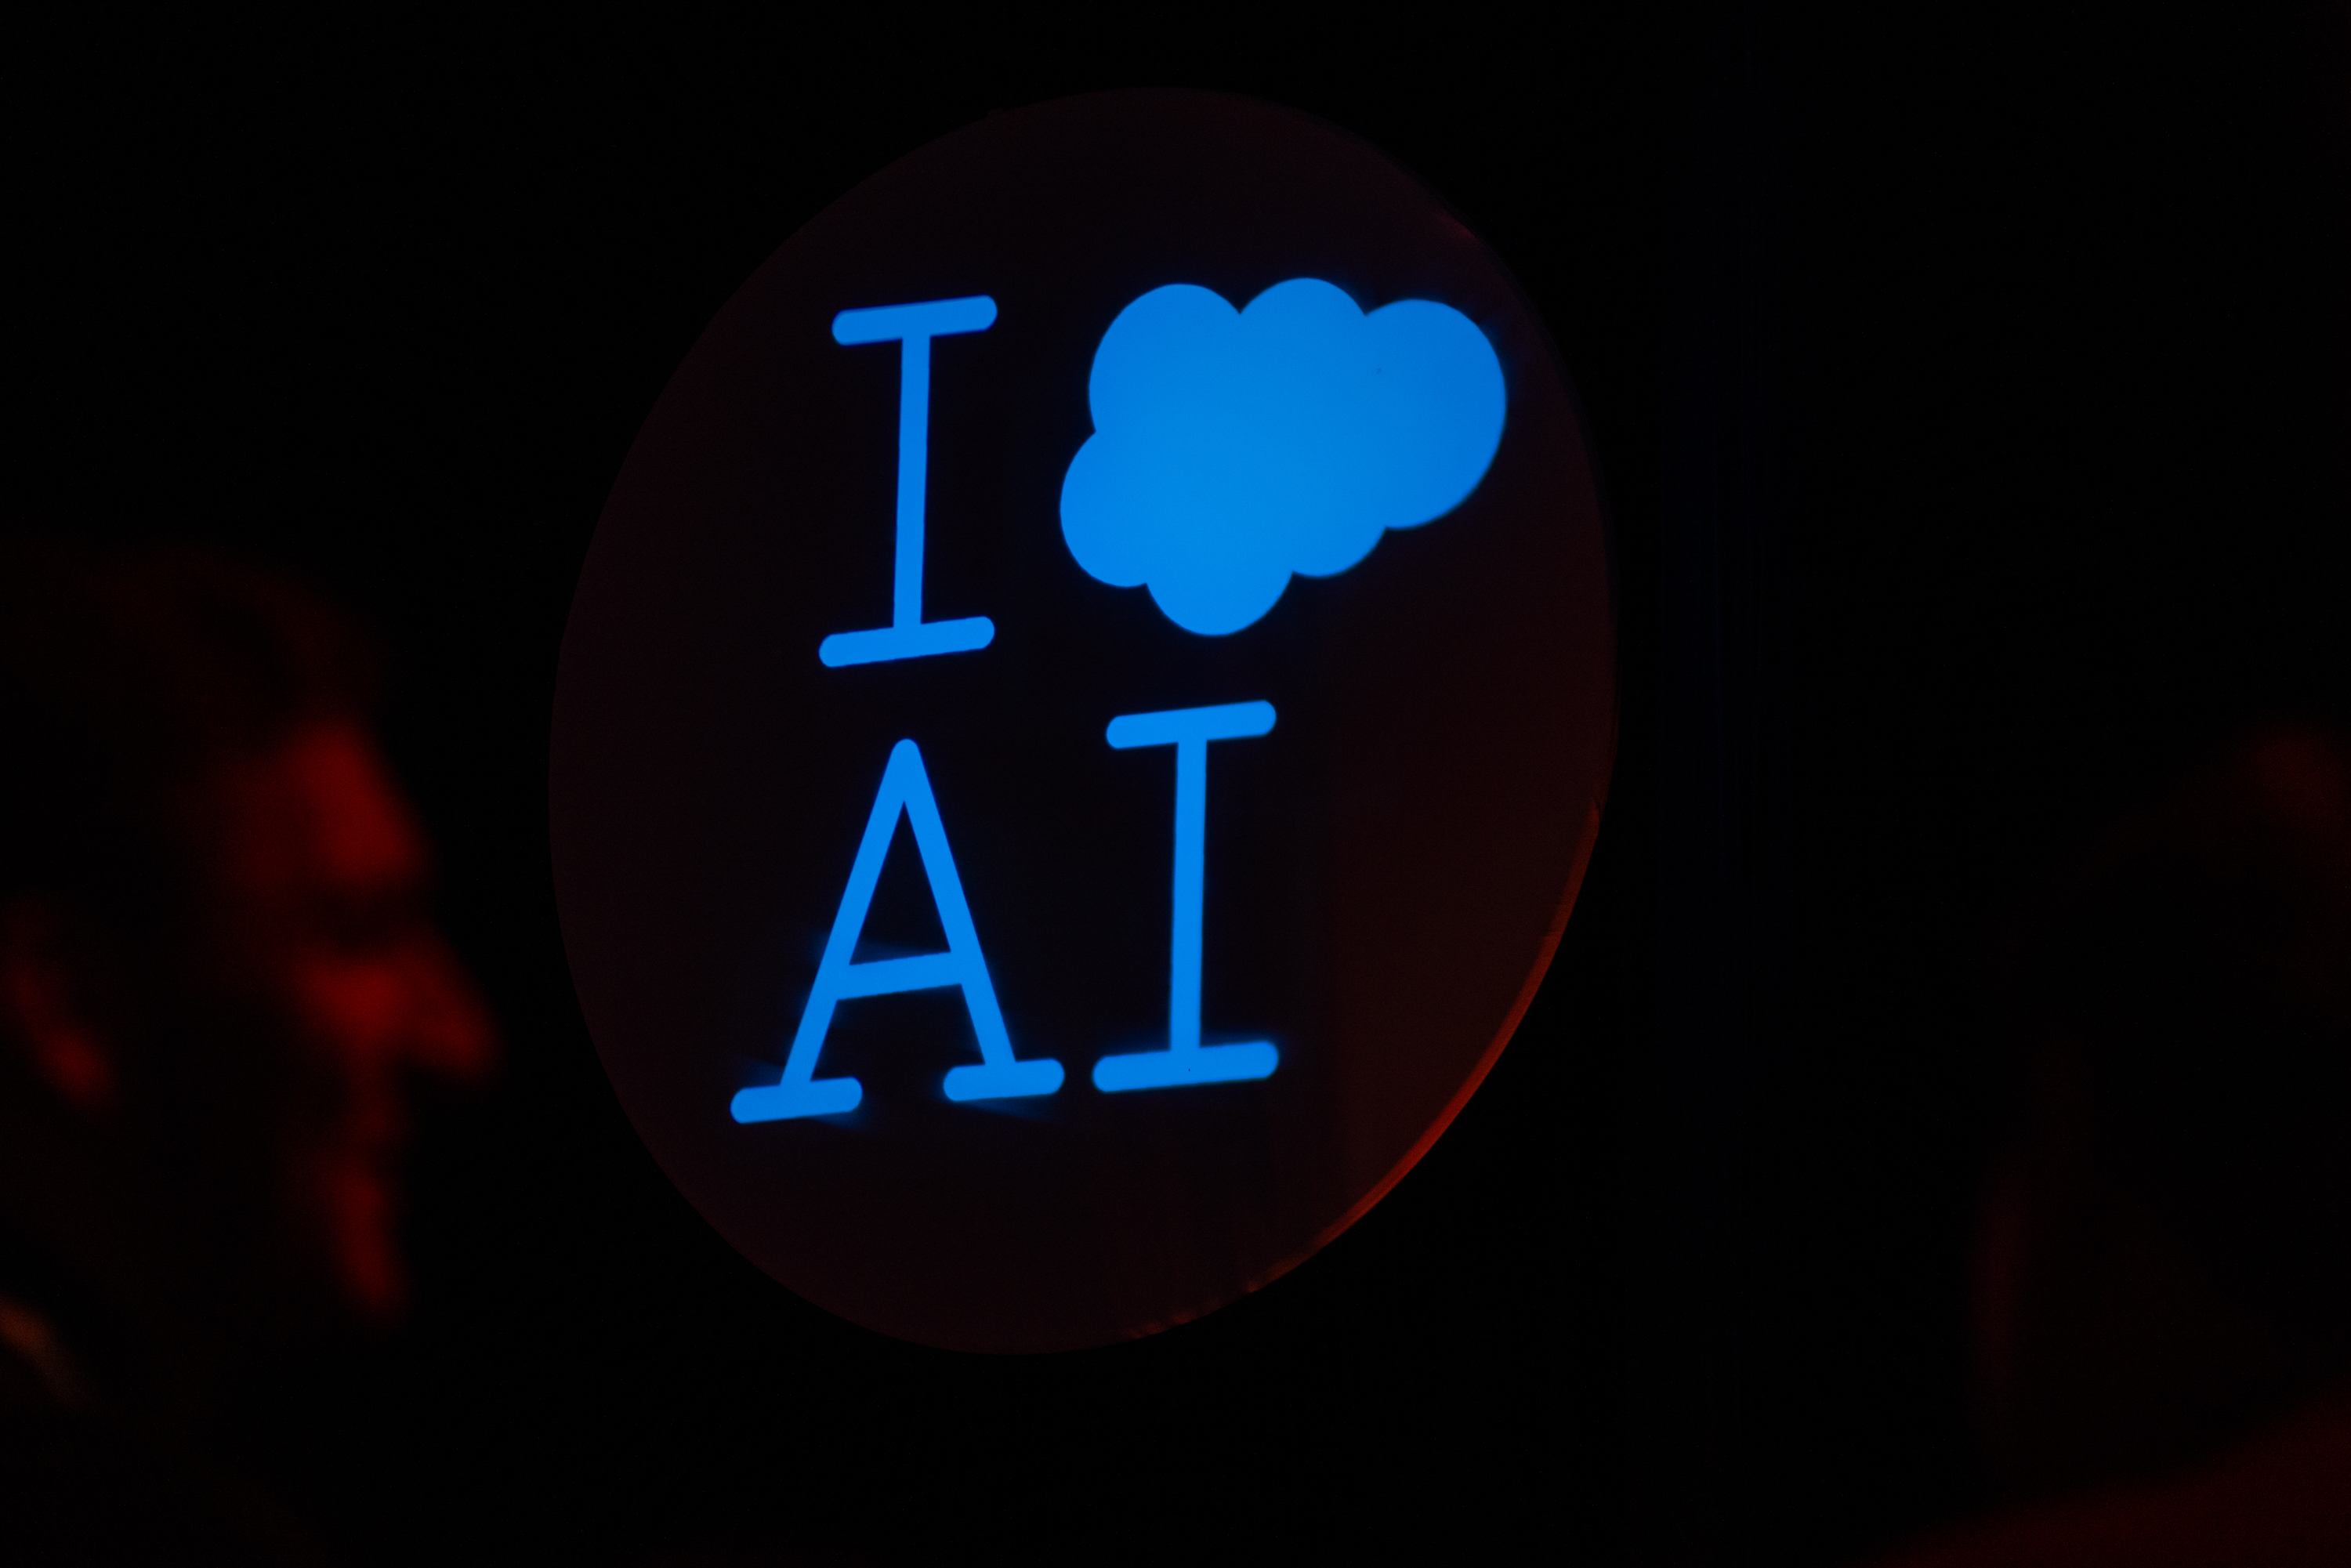 A glowing sign reads &quot;I ♥ AI&quot; against a dark background, with a heart symbol replaced by a cloud icon.